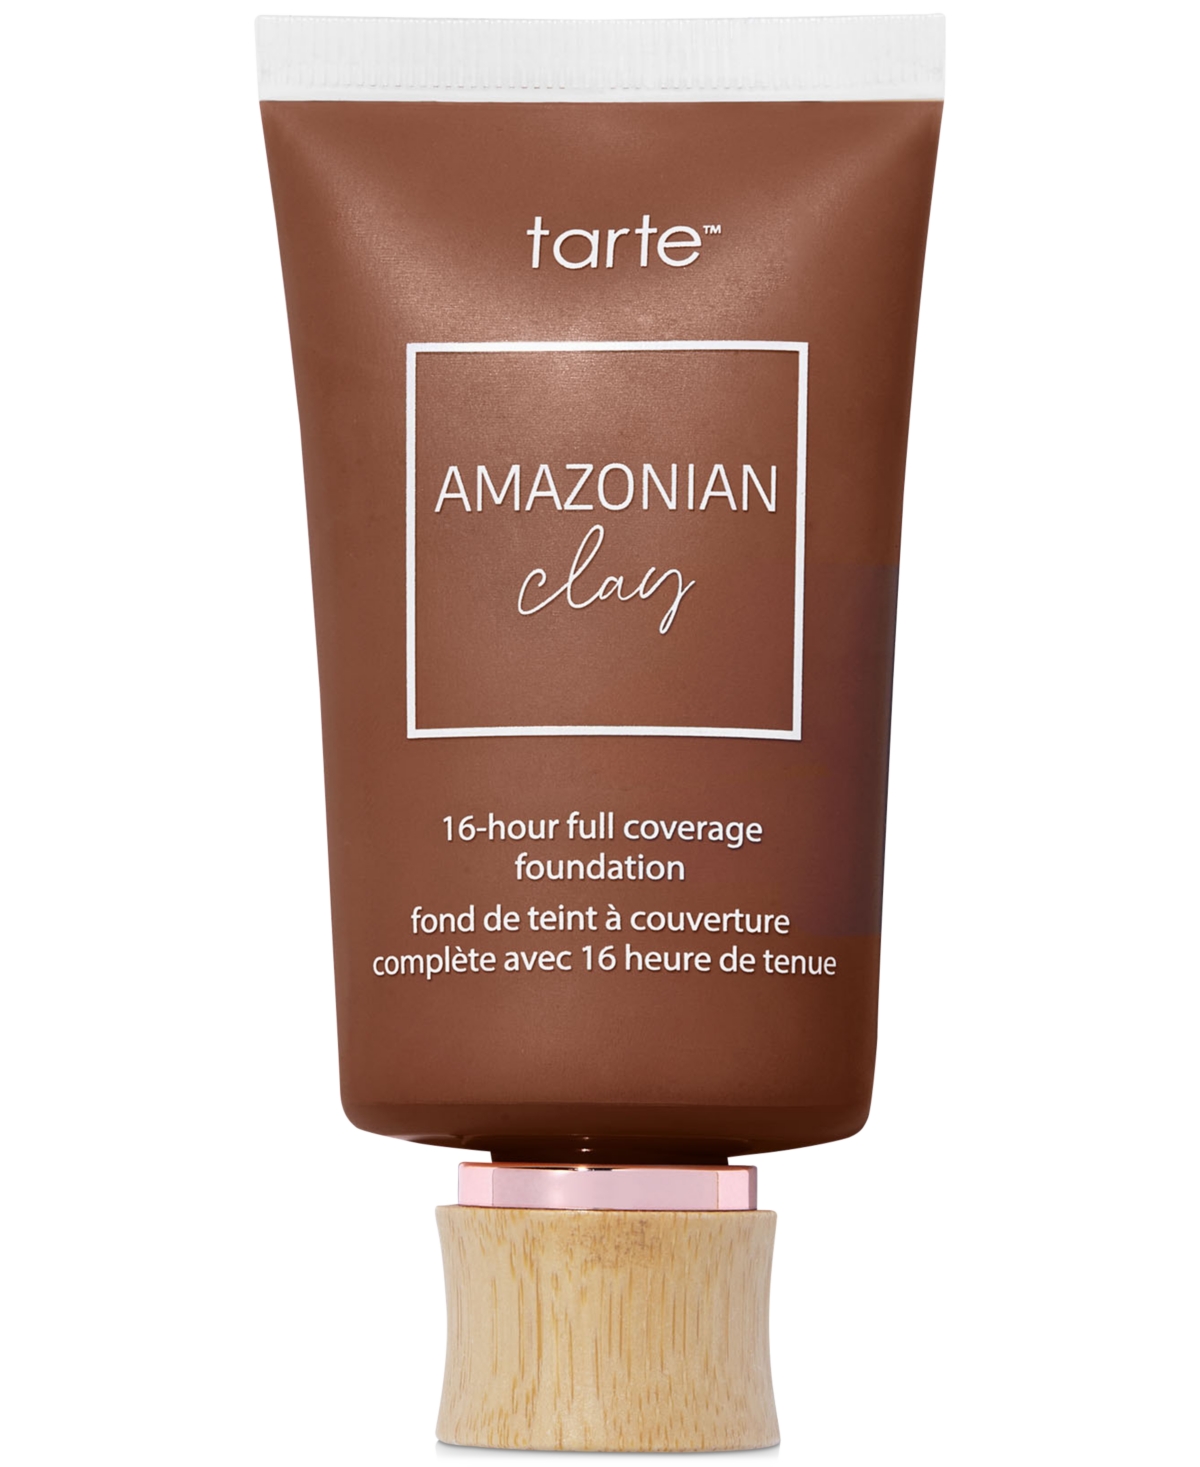 Tarte Amazonian Clay 16-hour Full Coverage Foundation In Hrichhoney - Deeper Skin With Warm,peac